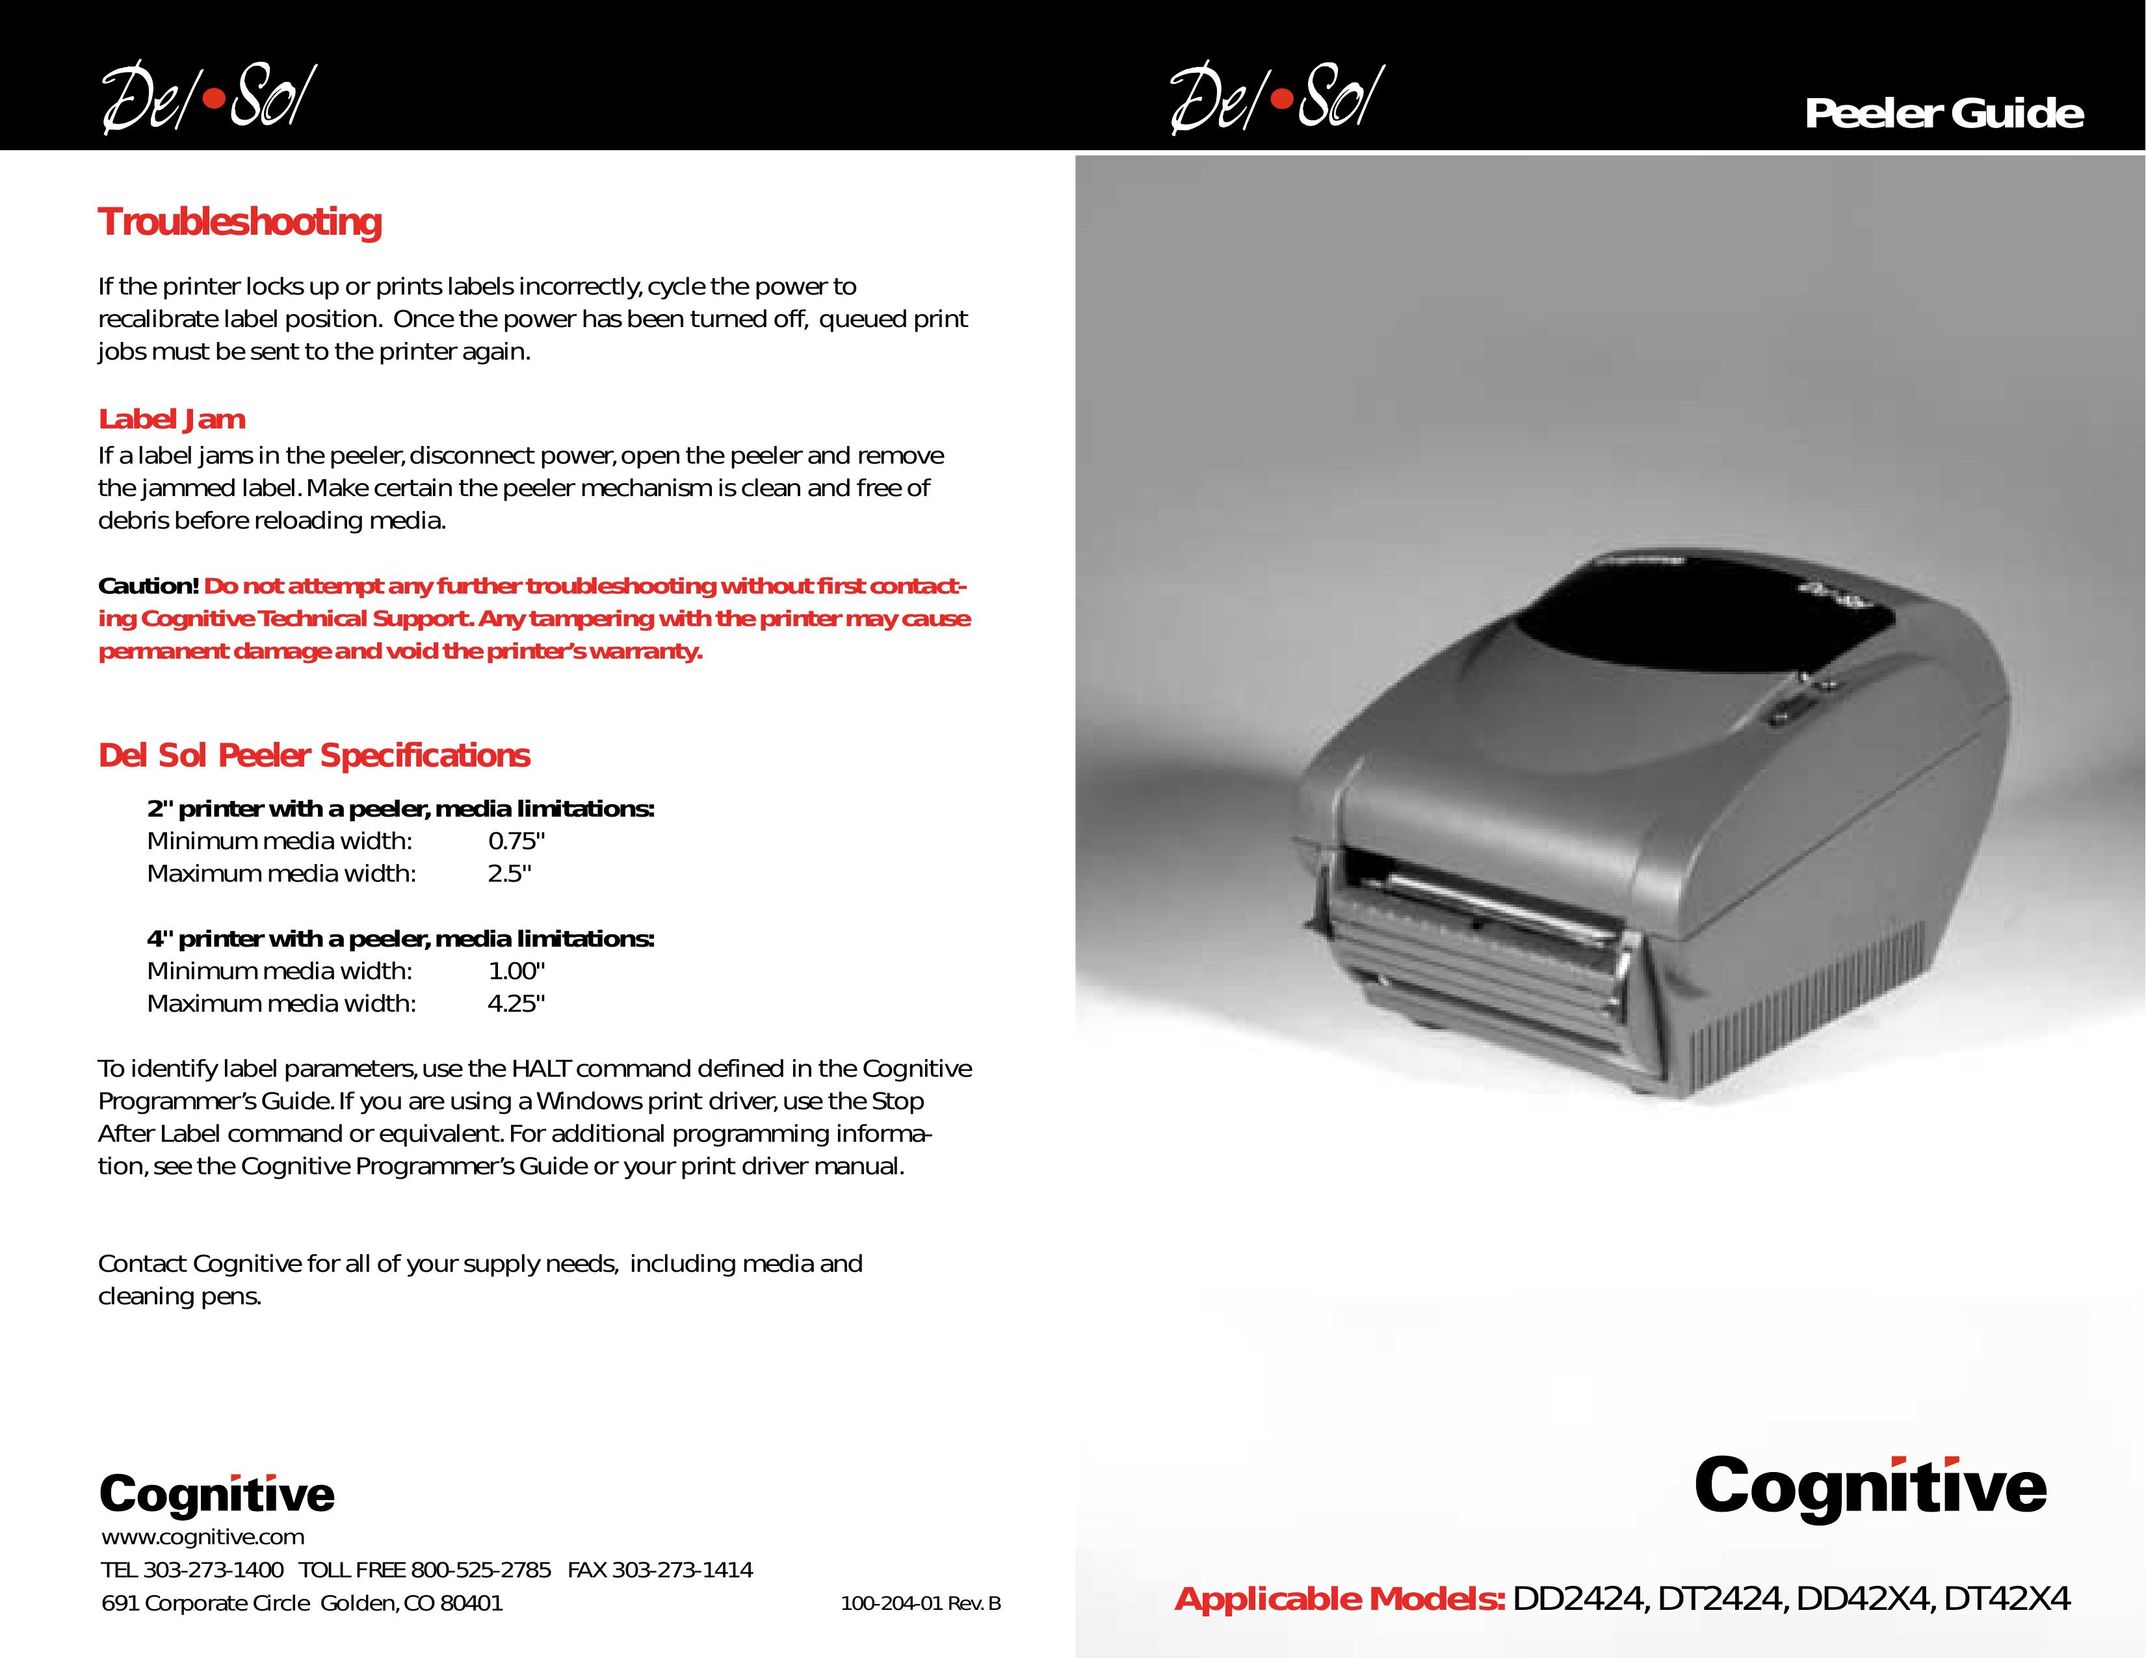 Cognitive Solutions DD42X4 Printer User Manual